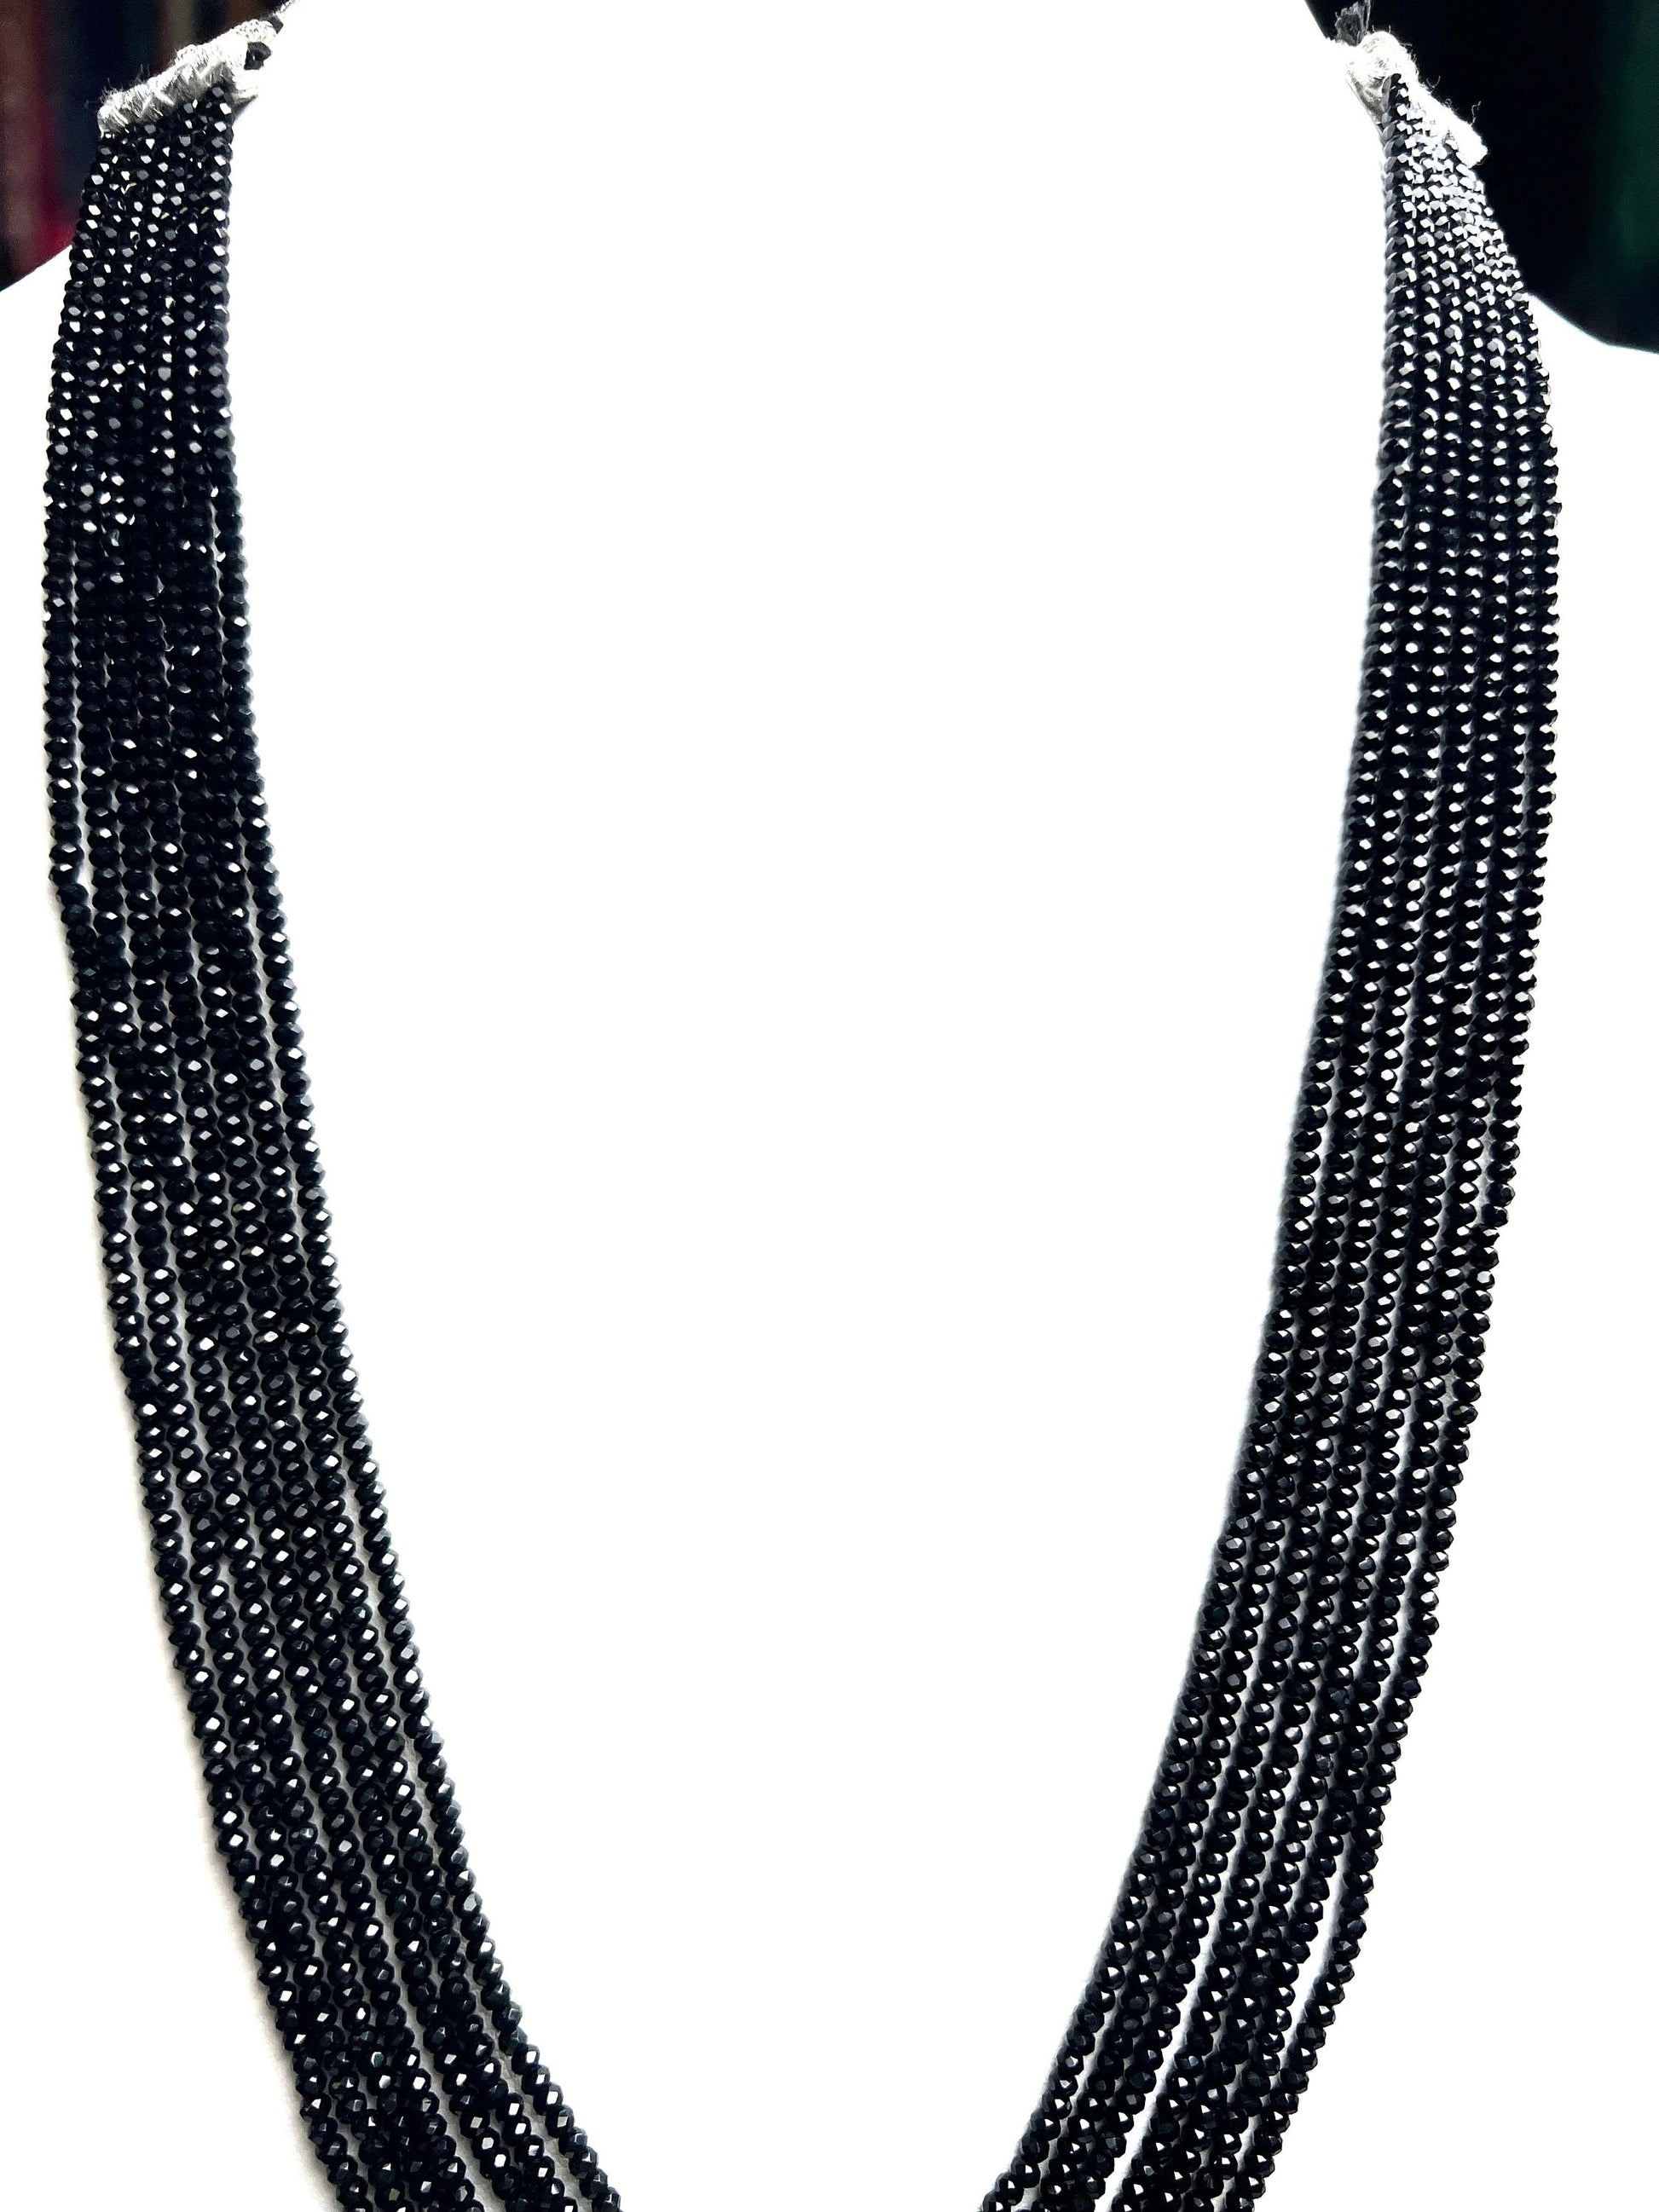 Genuine Black Spinel 7 line necklace, 3mm micro faceted Gemstone 7 line with adjustable thread necklace.